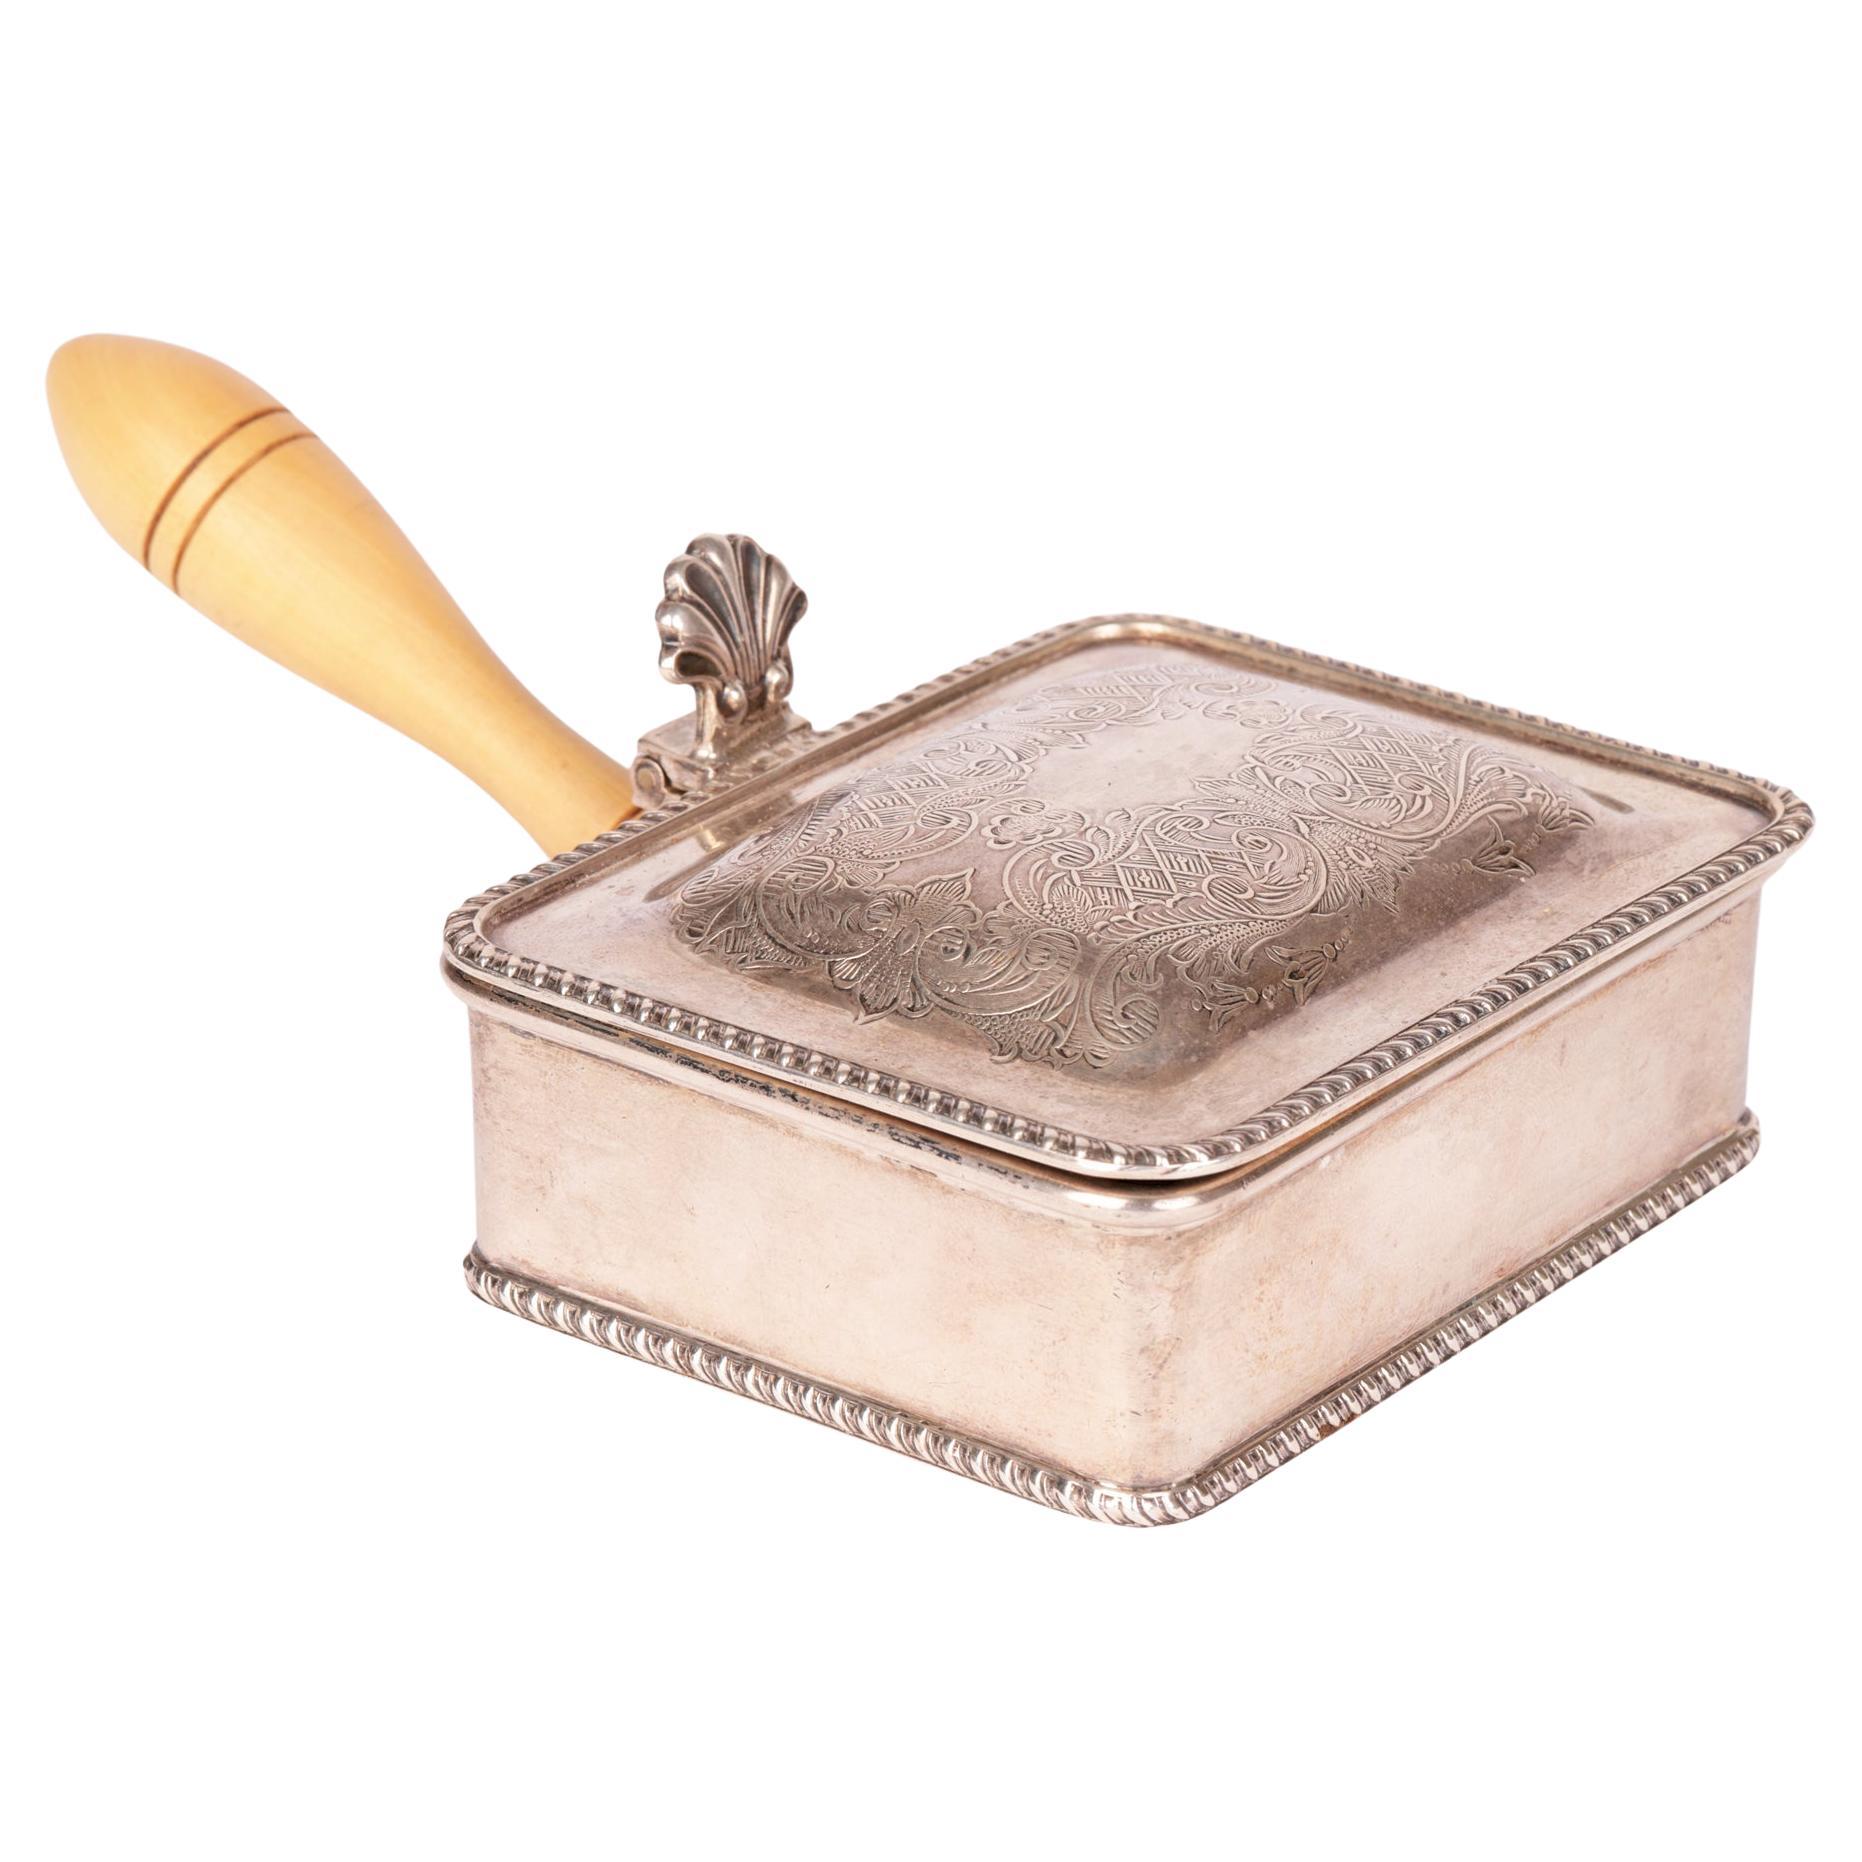 Continental Dutch Wood Handled Silver Ashtray or Cheroot Holder